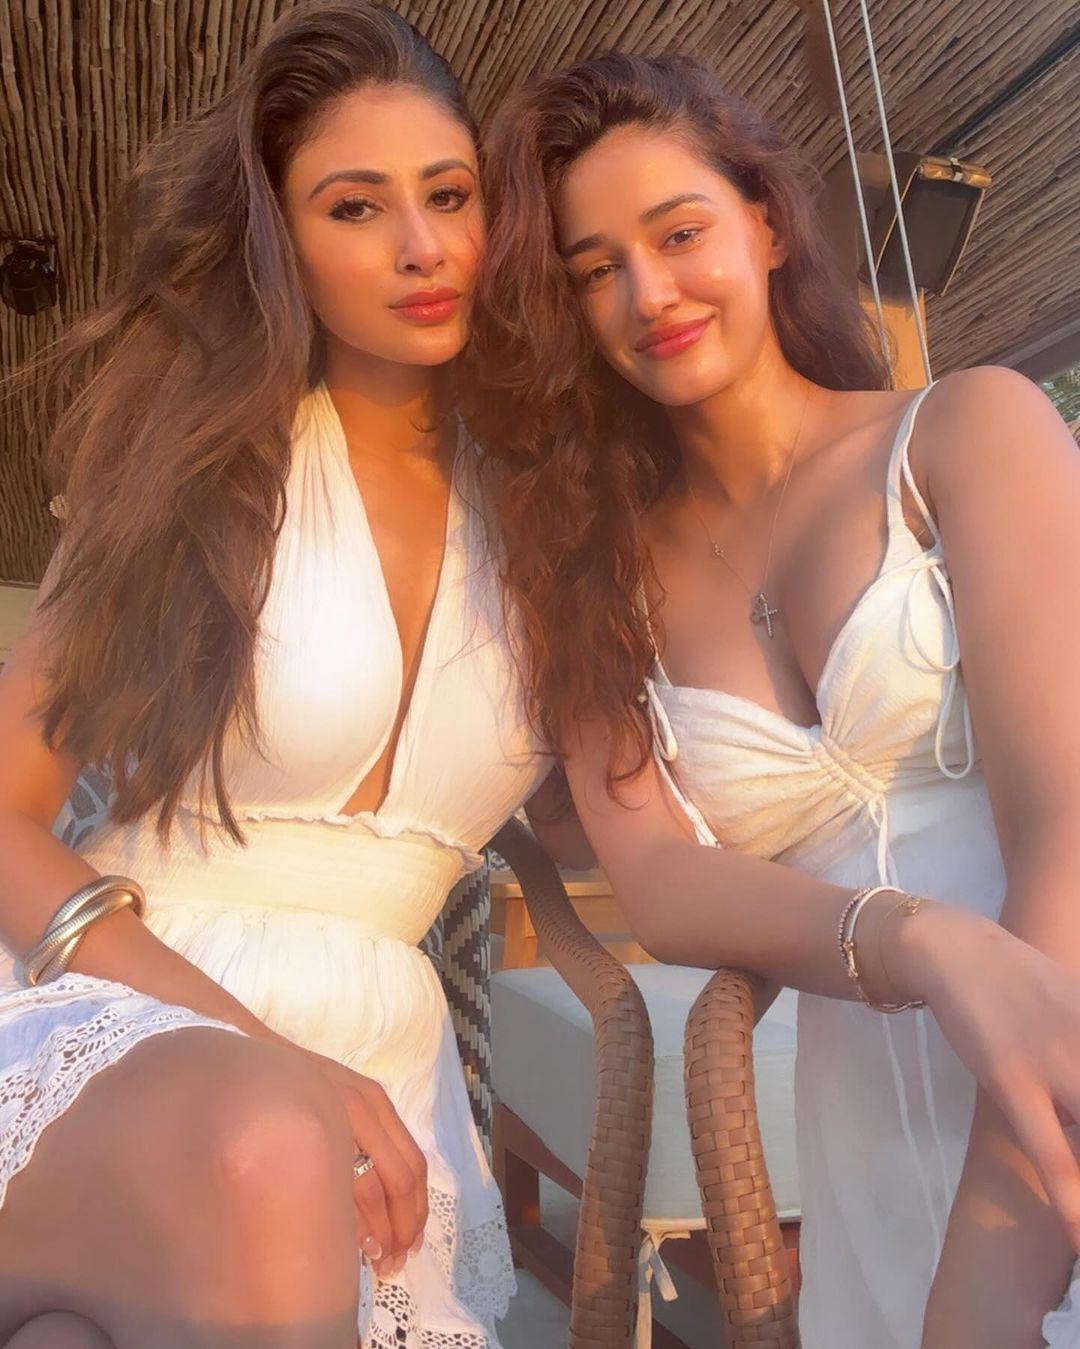 The photos also give us a glimpse of the bond Mouni and Disha share